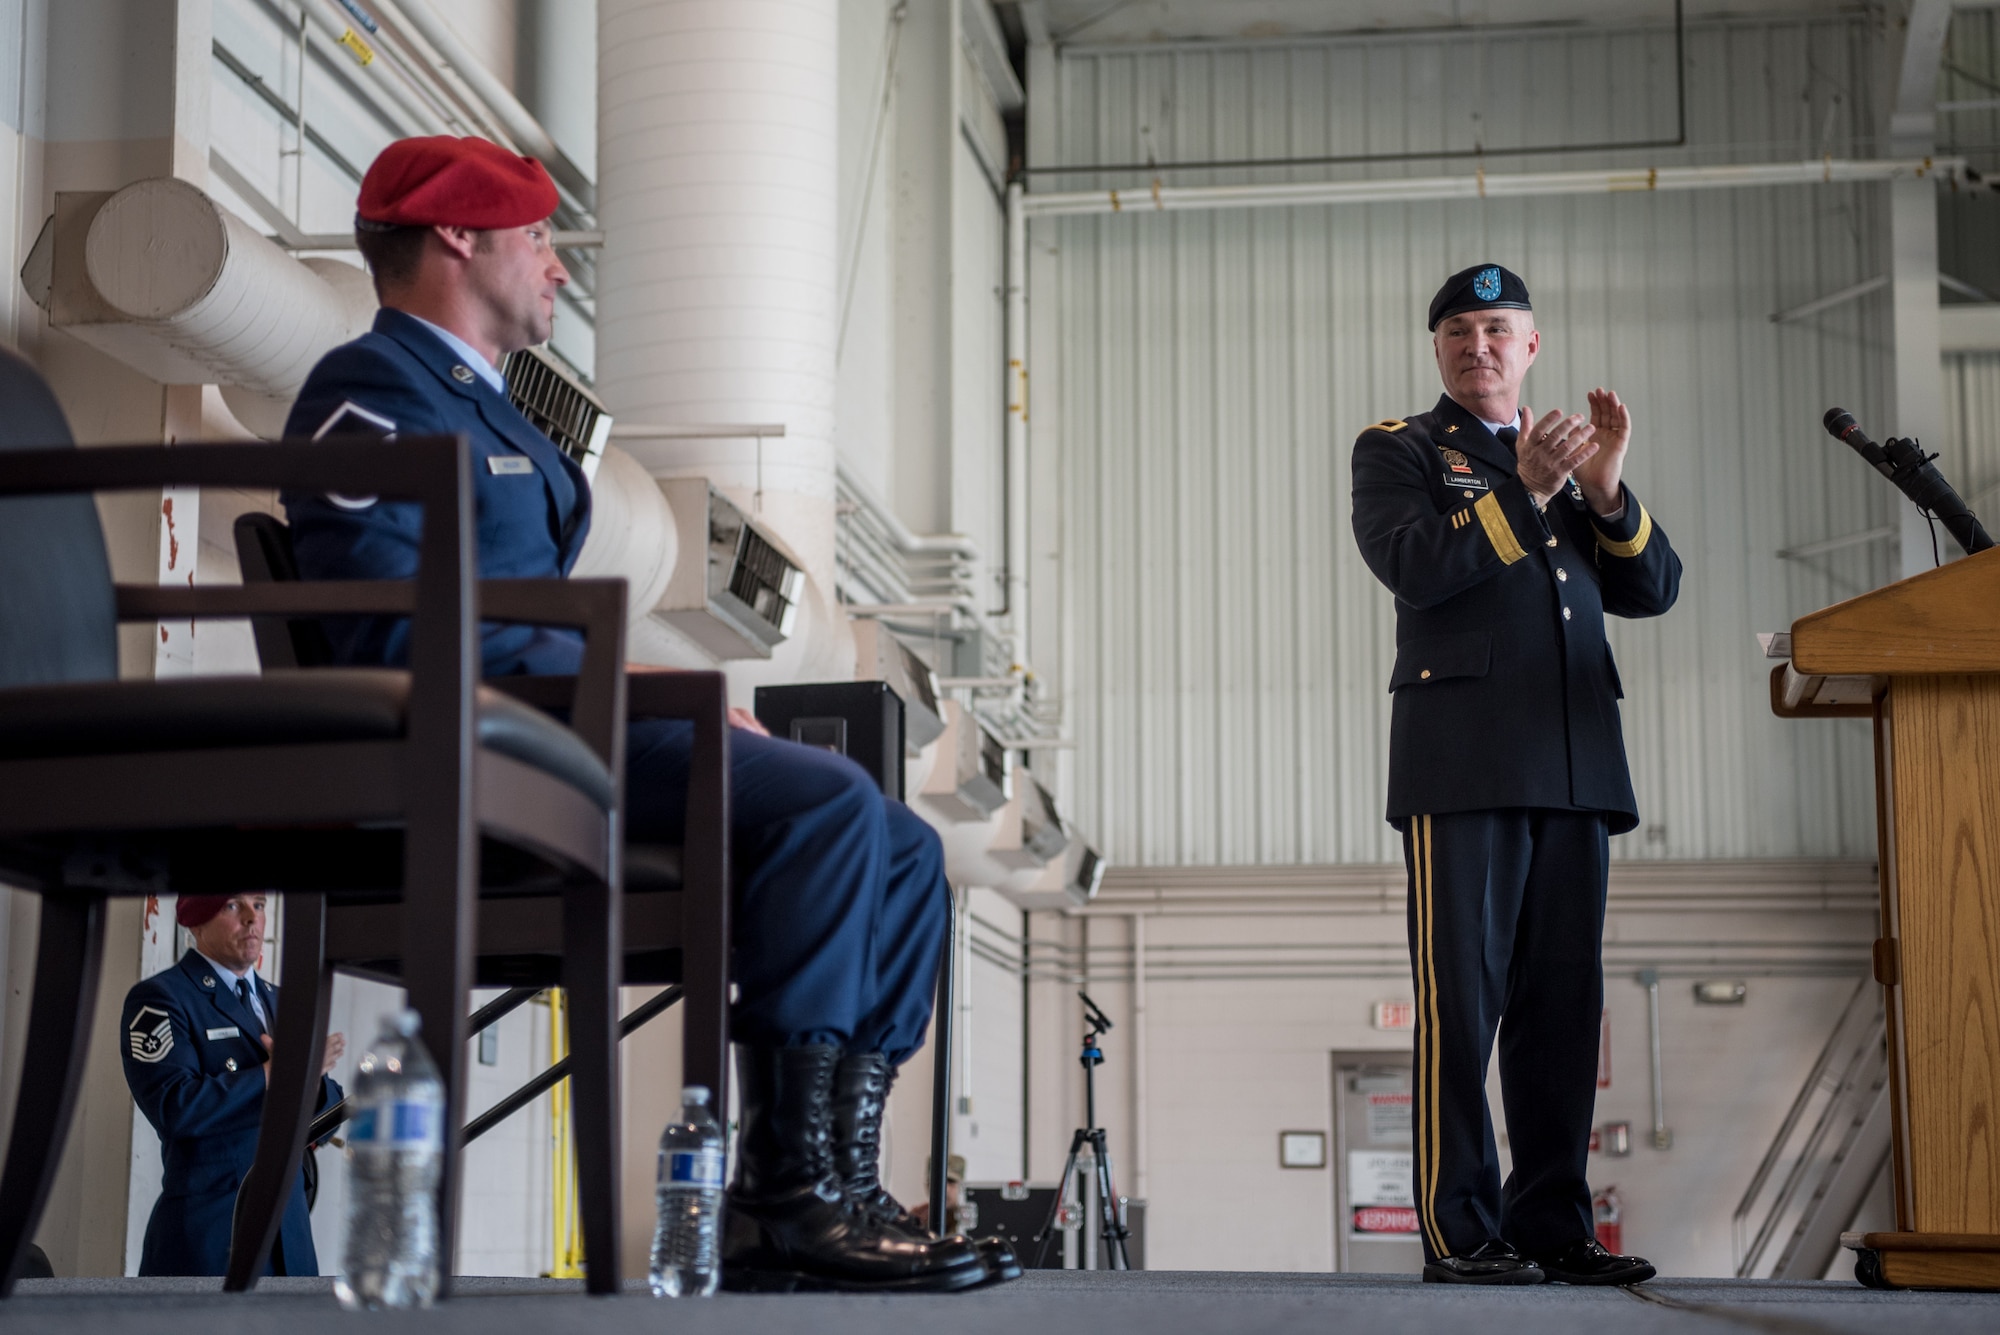 Brig. Gen. Hal Lamberton (right), applauds Master Sgt. Daniel Keller (left), a combat controller in the 123rd Special Tactics Squadron, during an Airman’s Medal award ceremony at the Kentucky Air National Guard Base in Louisville, Ky., June 12, 2021. Keller earned the award for heroism in recognition of his actions to save human life following a traffic accident near Louisville in 2018. (U.S. Air National Guard photo by Tech. Sgt. Joshua Horton)